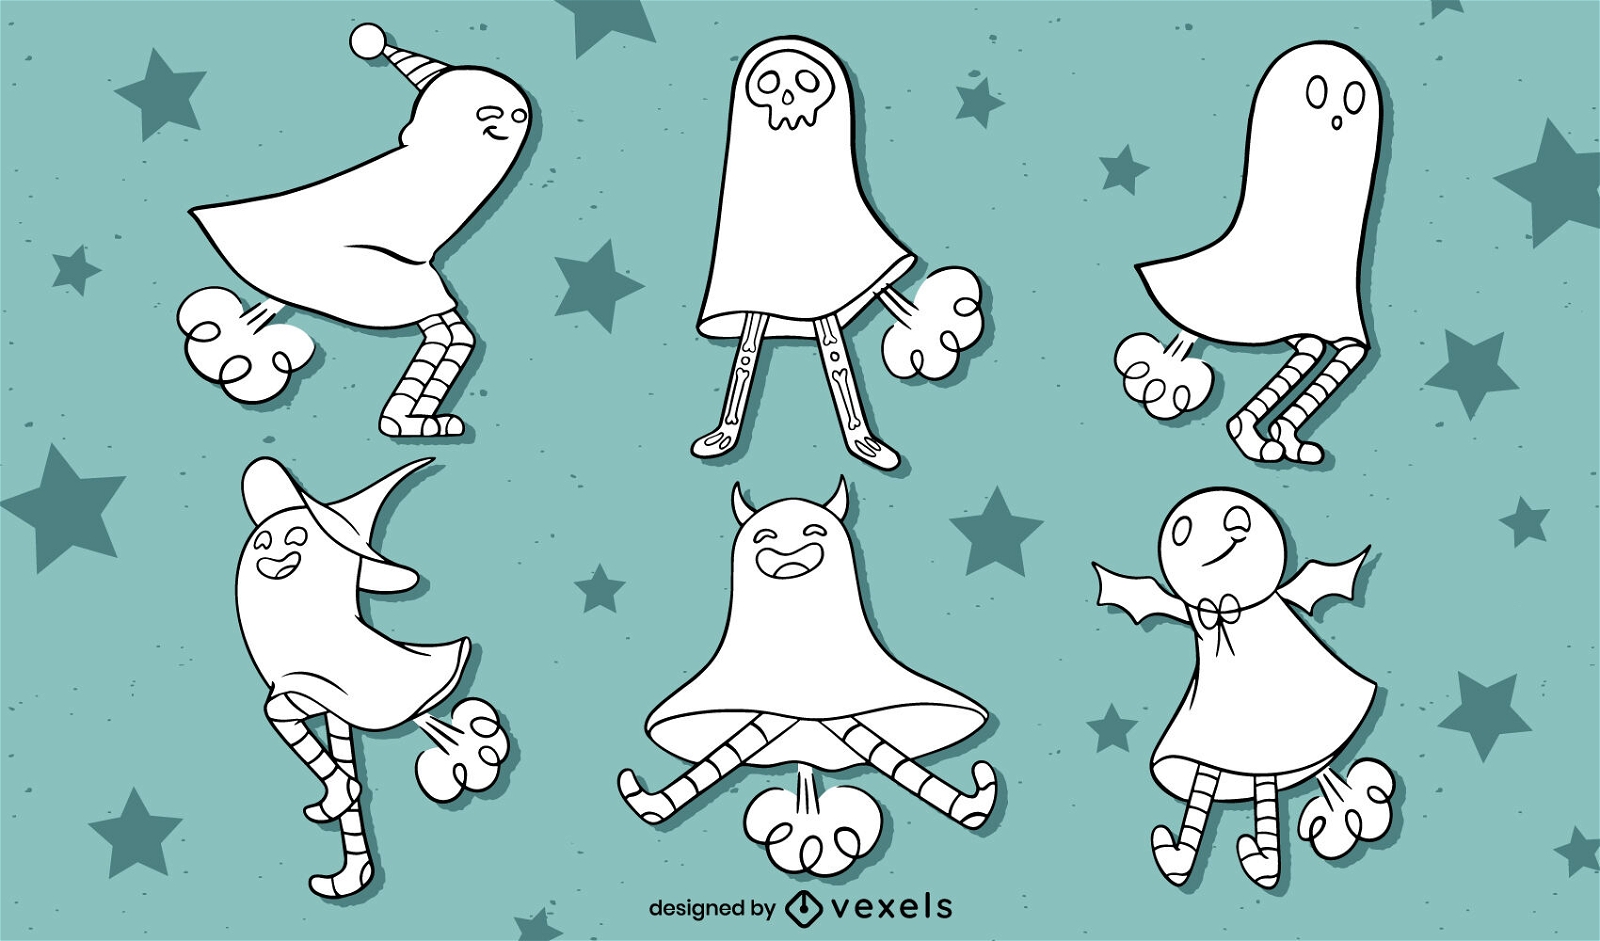 Farting ghosts character set